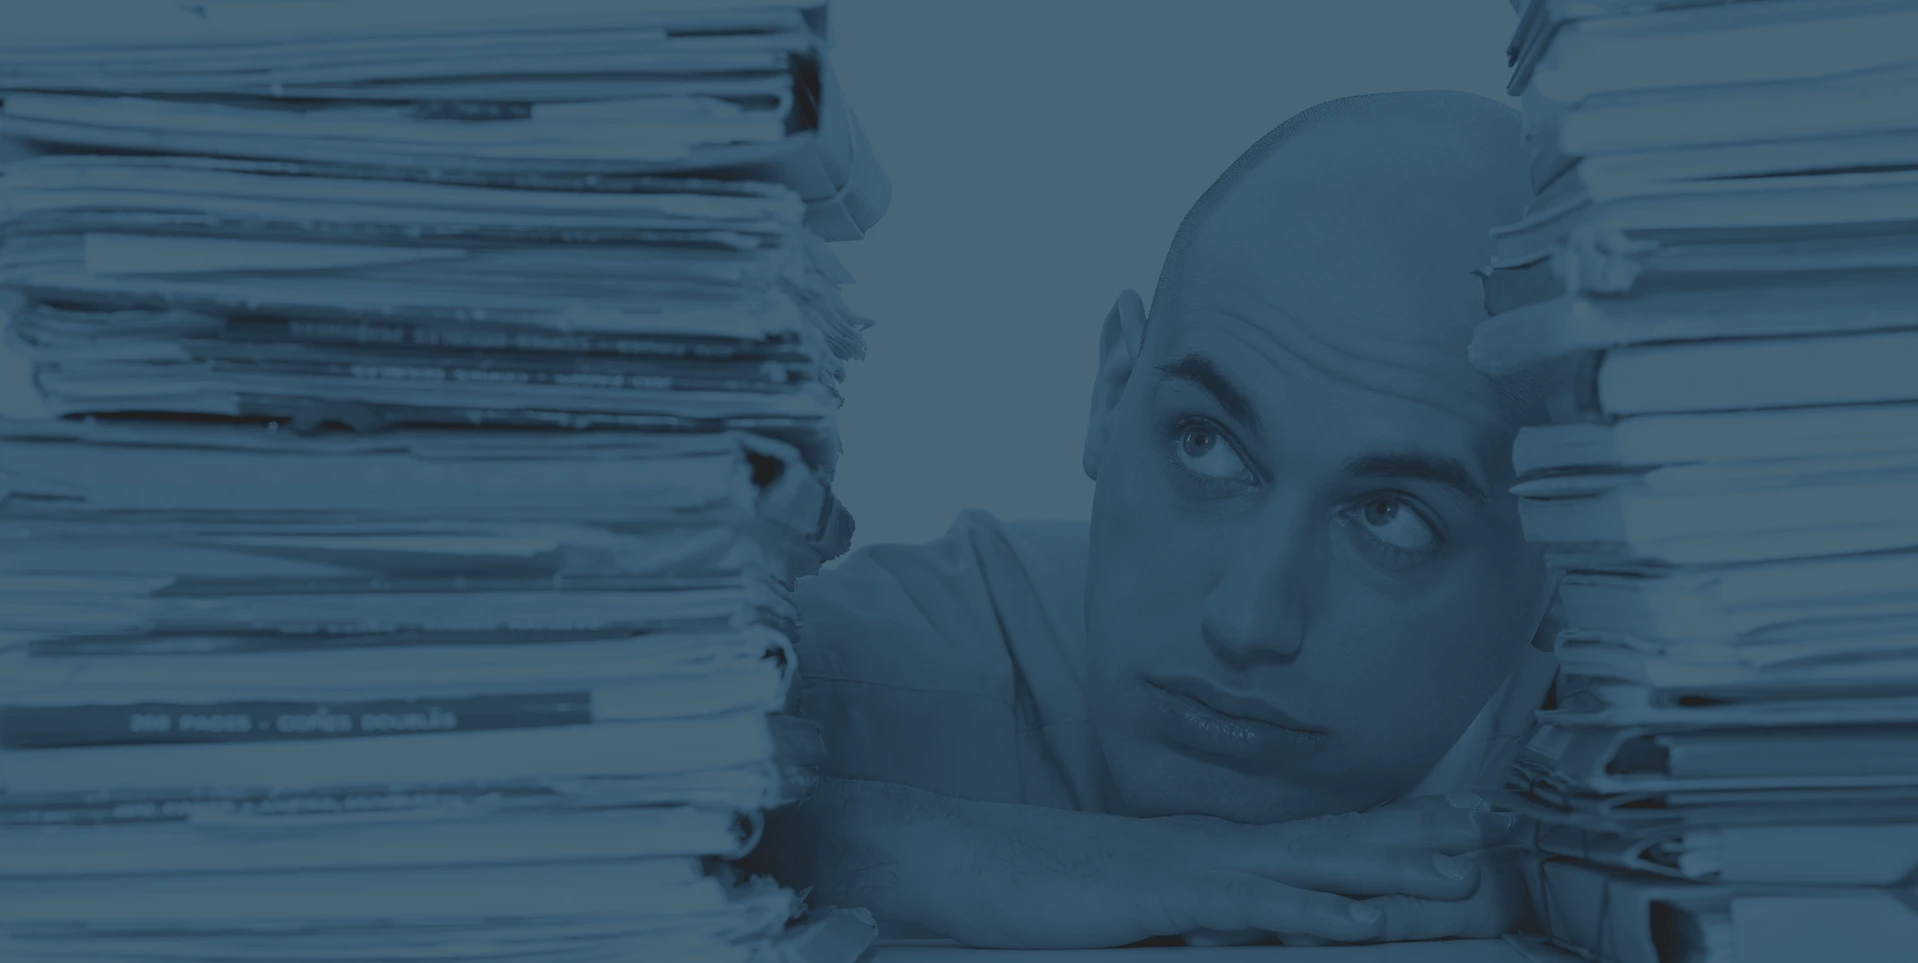 claims manager or administrator stressed leaning between stacks of claims files